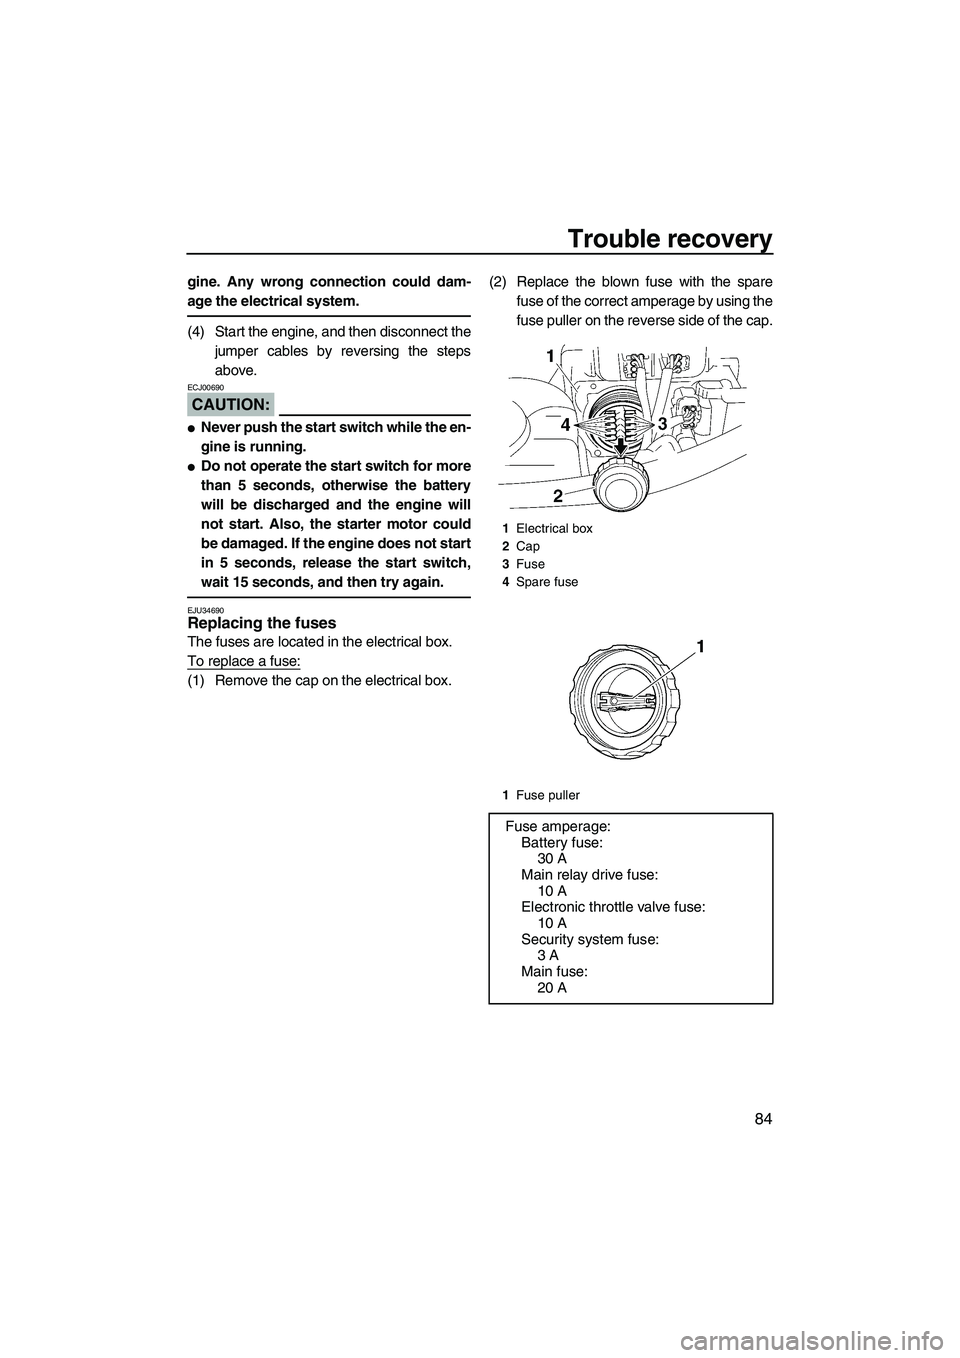 YAMAHA VX CRUISER 2007  Owners Manual Trouble recovery
84
gine. Any wrong connection could dam-
age the electrical system.
(4) Start the engine, and then disconnect the
jumper cables by reversing the steps
above.
CAUTION:
ECJ00690
Never 